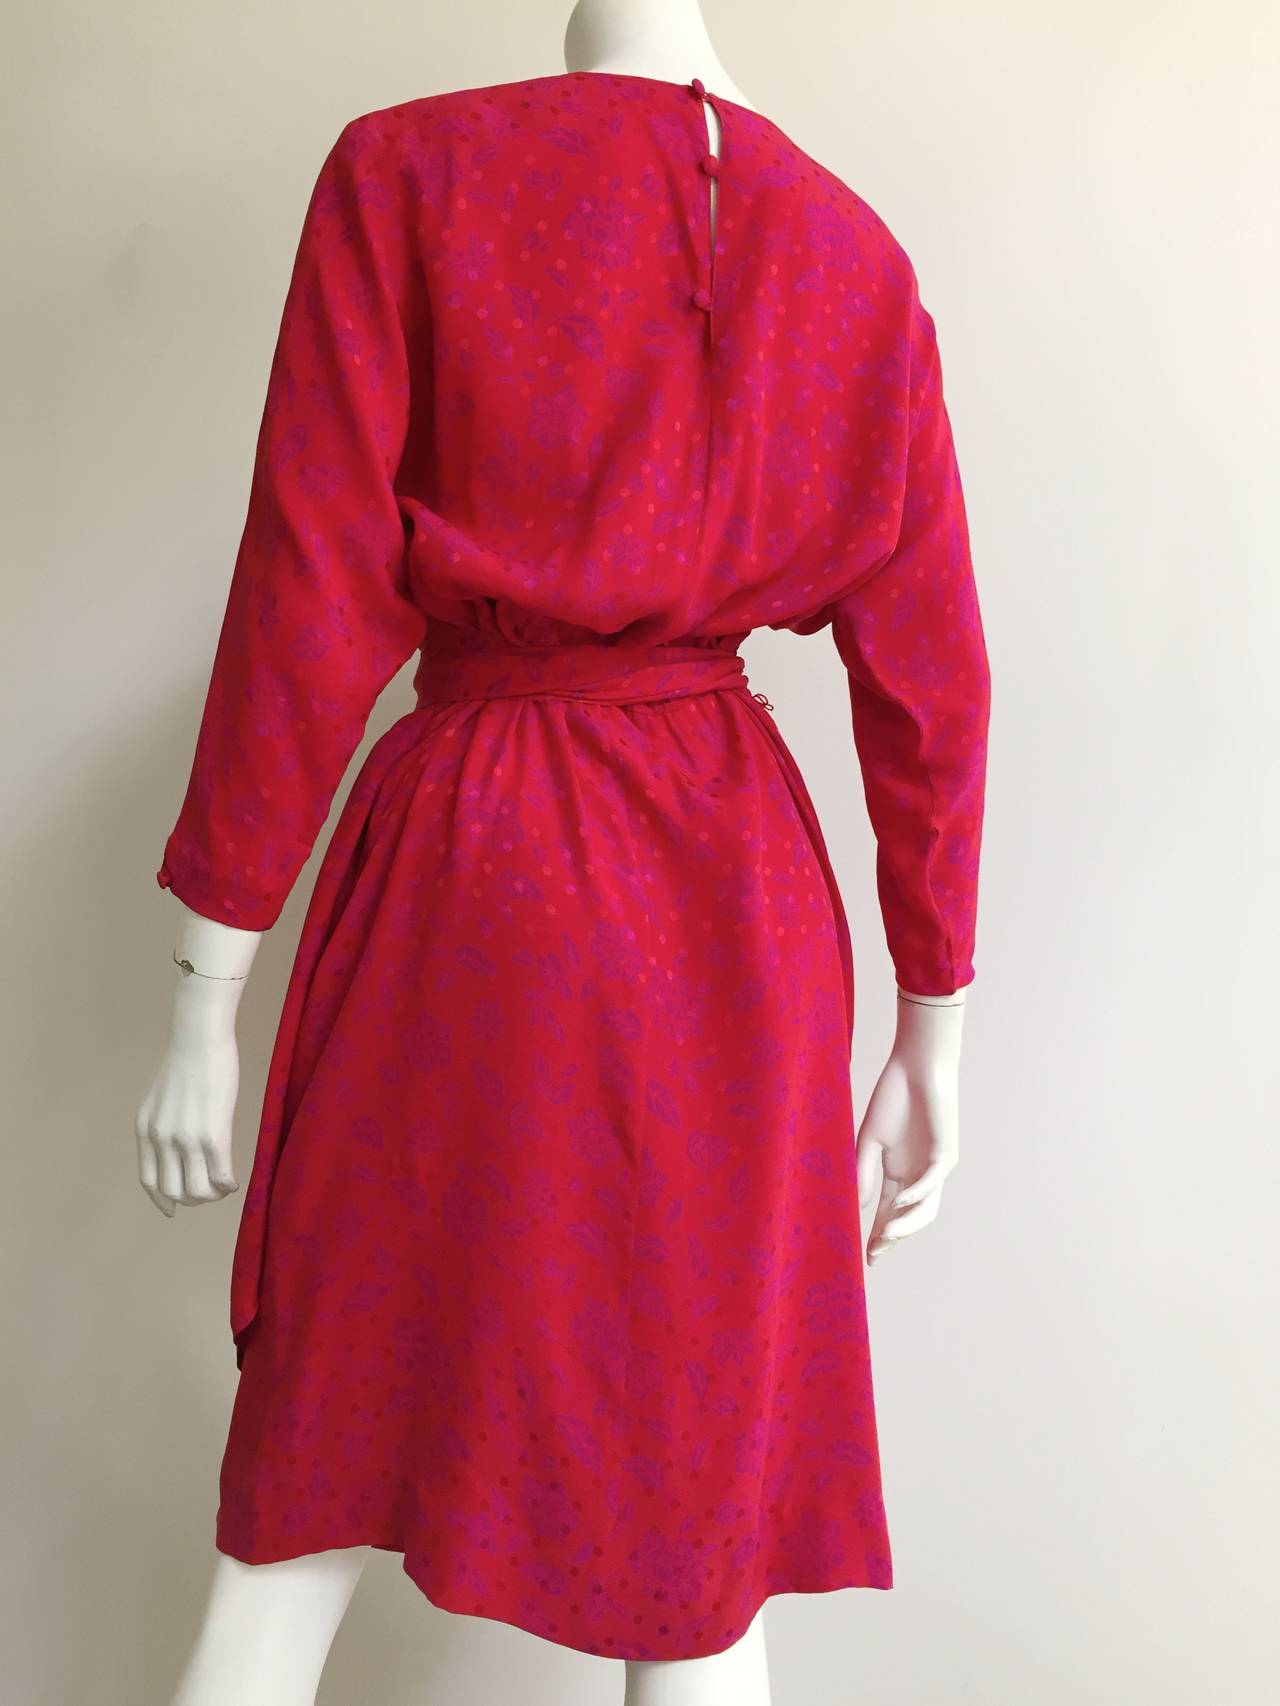 Guy Laroche 70s Silk Dress With Pockets Size 10. For Sale at 1stdibs